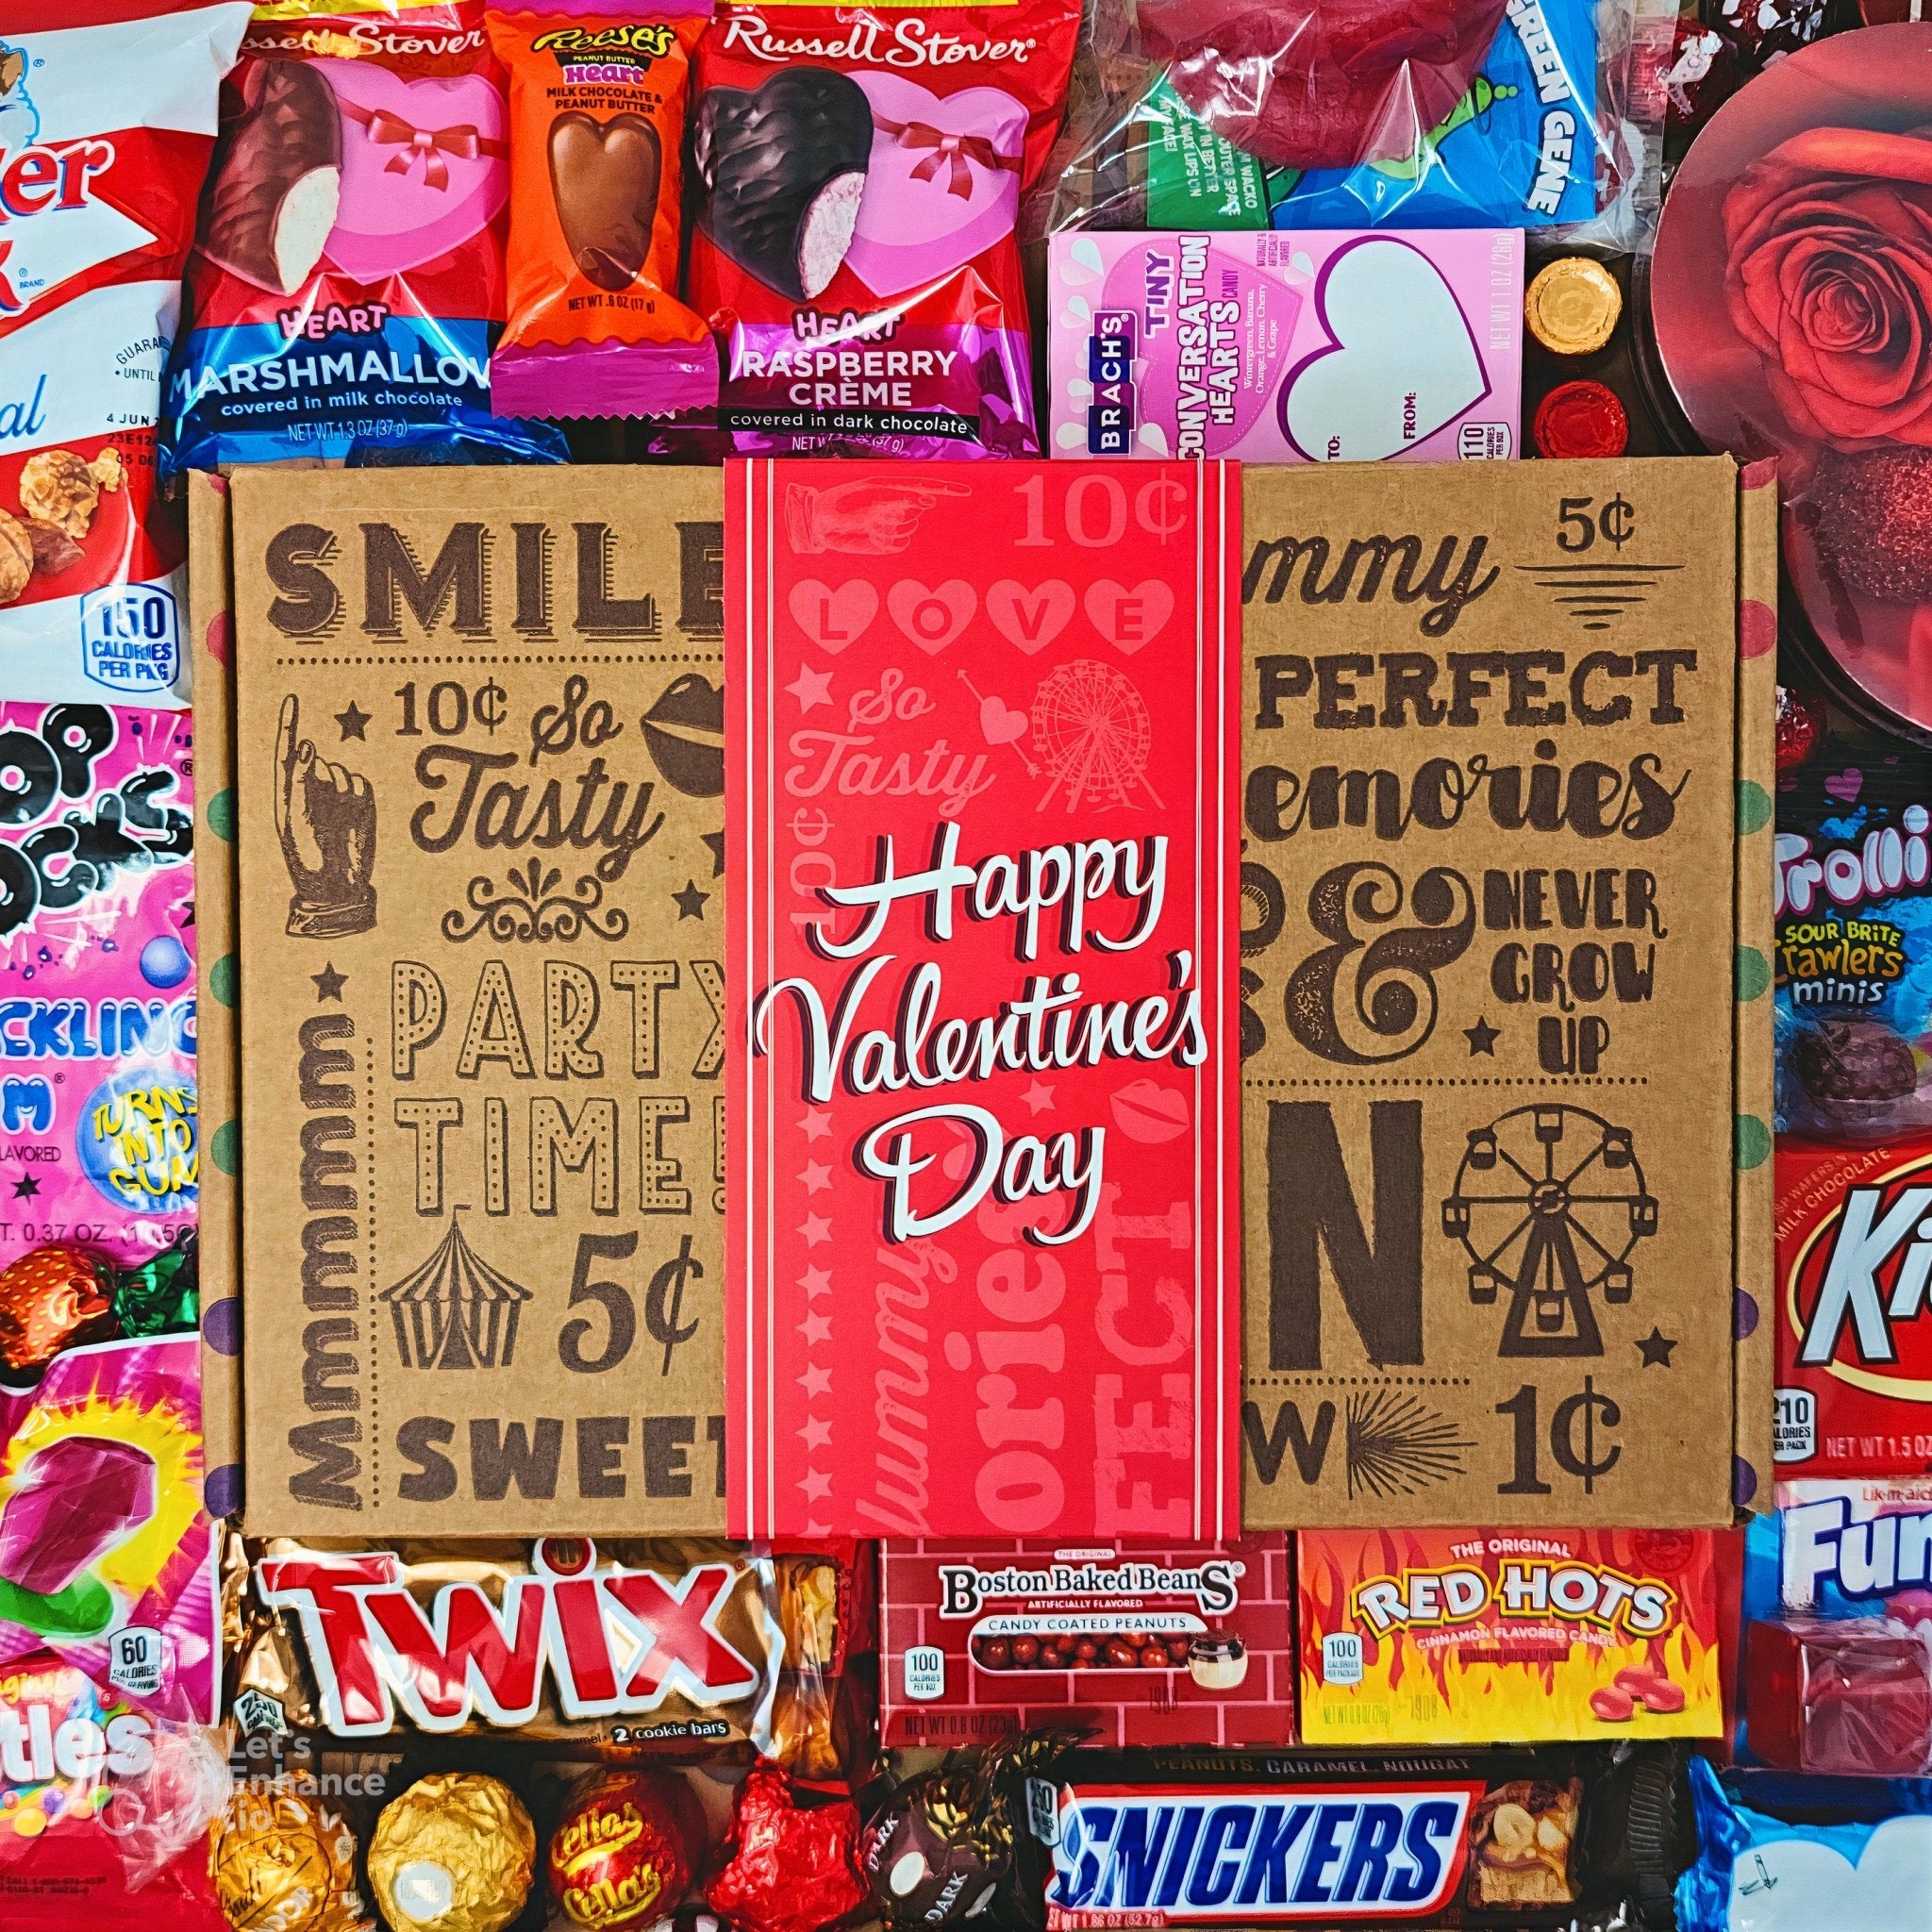 Amazon.com: Valentine's Day Gift Care Package (50ct) Snacks Chocolates  Candy Gift Box Assortment Variety Bundle Crate Present for Boy Girl Friend  Student College Child Husband Wife Boyfriend Girlfriend Love Niece : Grocery